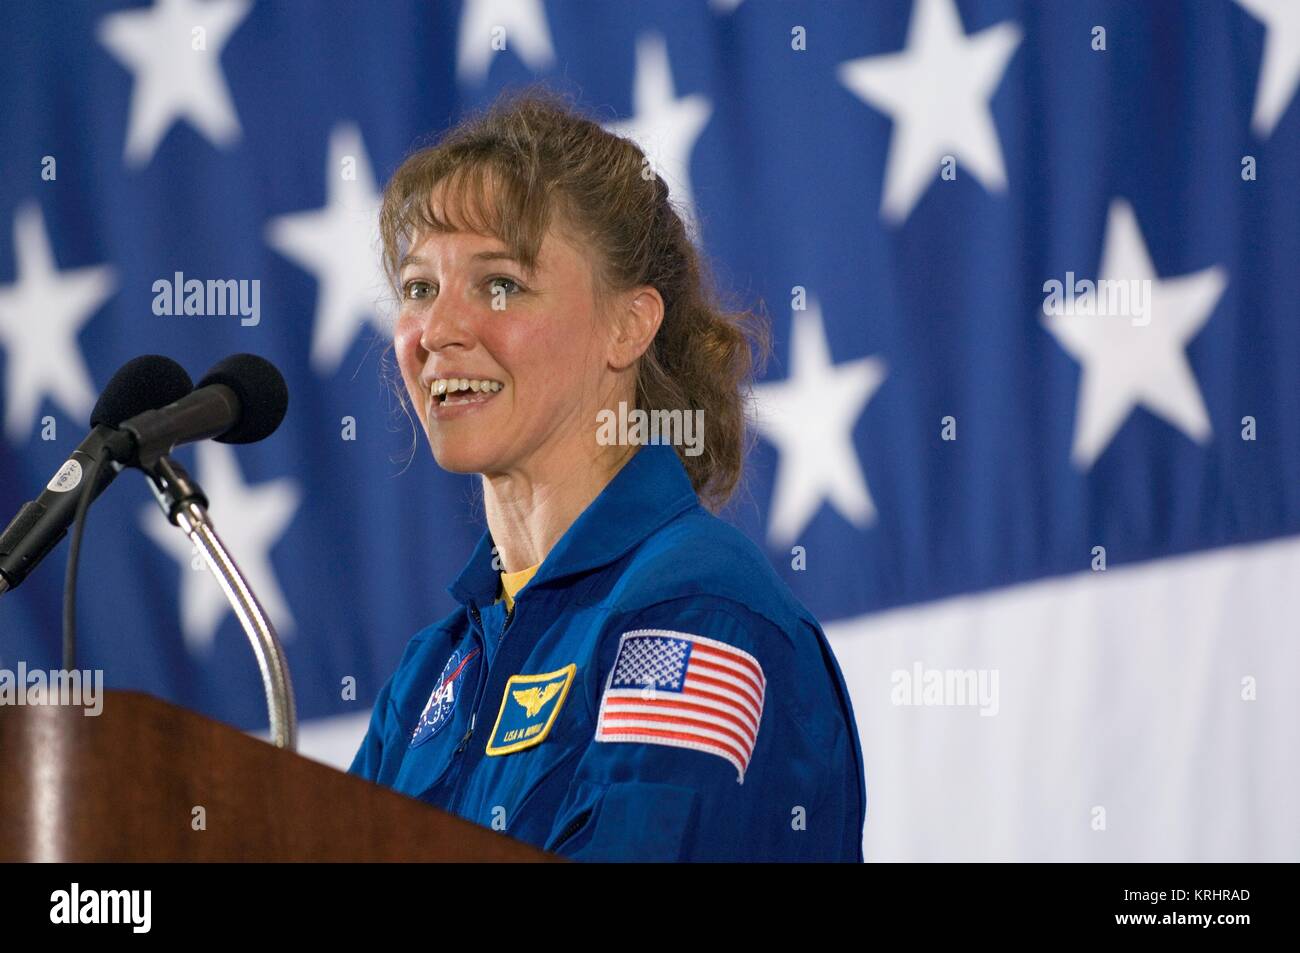 NASA International Space Station Space Shuttle Discovery STS-121 mission prime crew member American astronaut Lisa Nowak speaks during the crew return ceremony at the Johnson Space Center Ellington Field Hangar 276 June 18, 2006 in Houston, Texas. Stock Photo